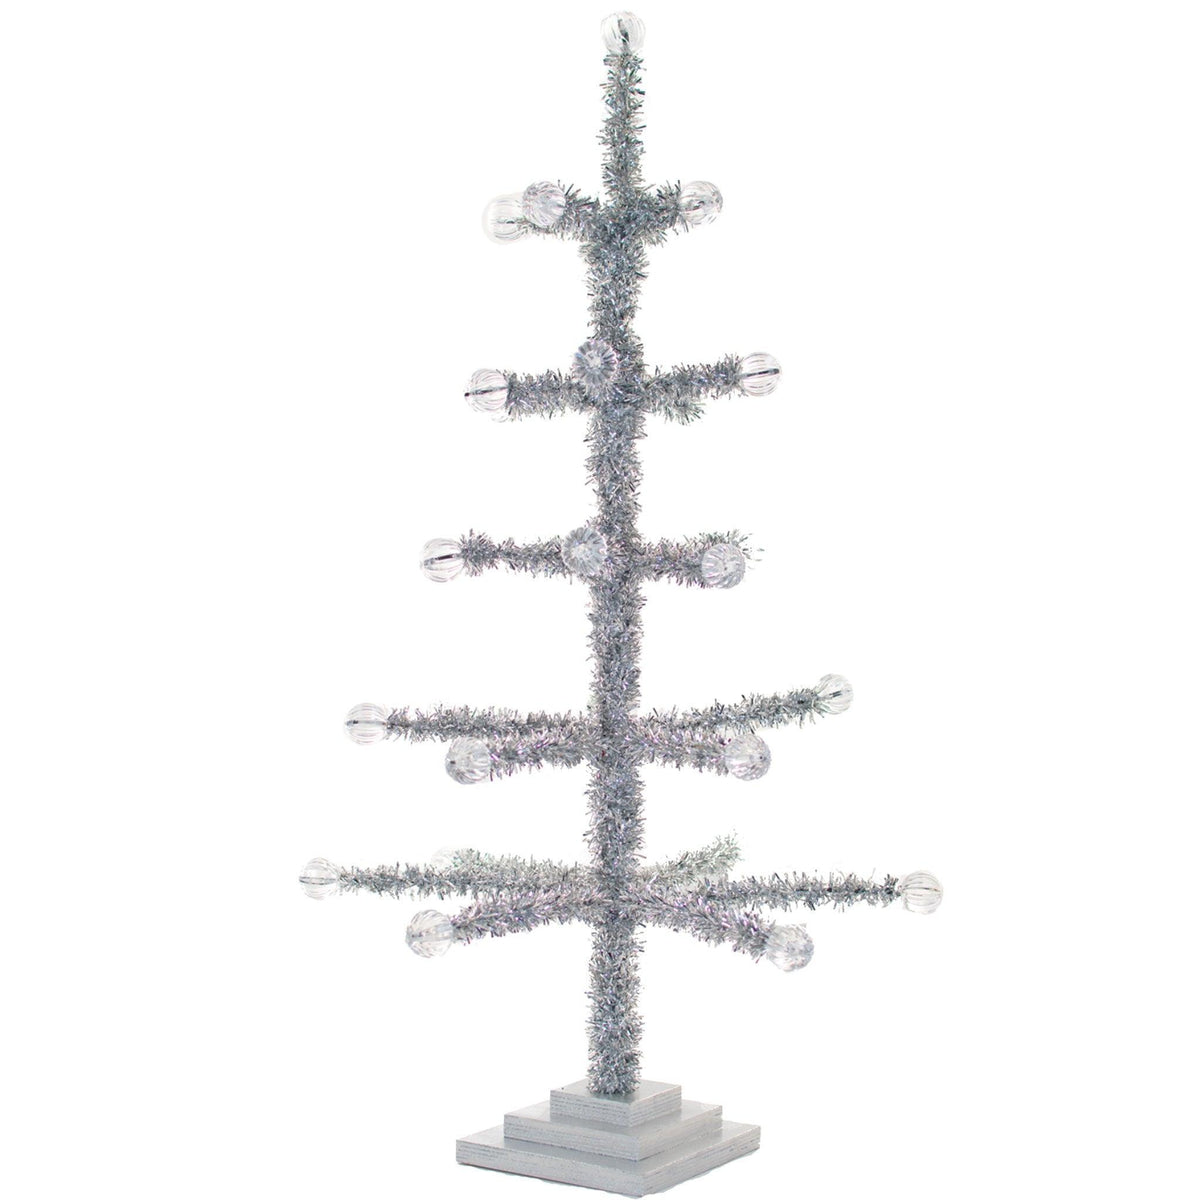 Lee Display's 4FT Tall Silver Merchandising and Display Tree with Acrylic Beads at the end of each branch.  Sold at leedisplay.com